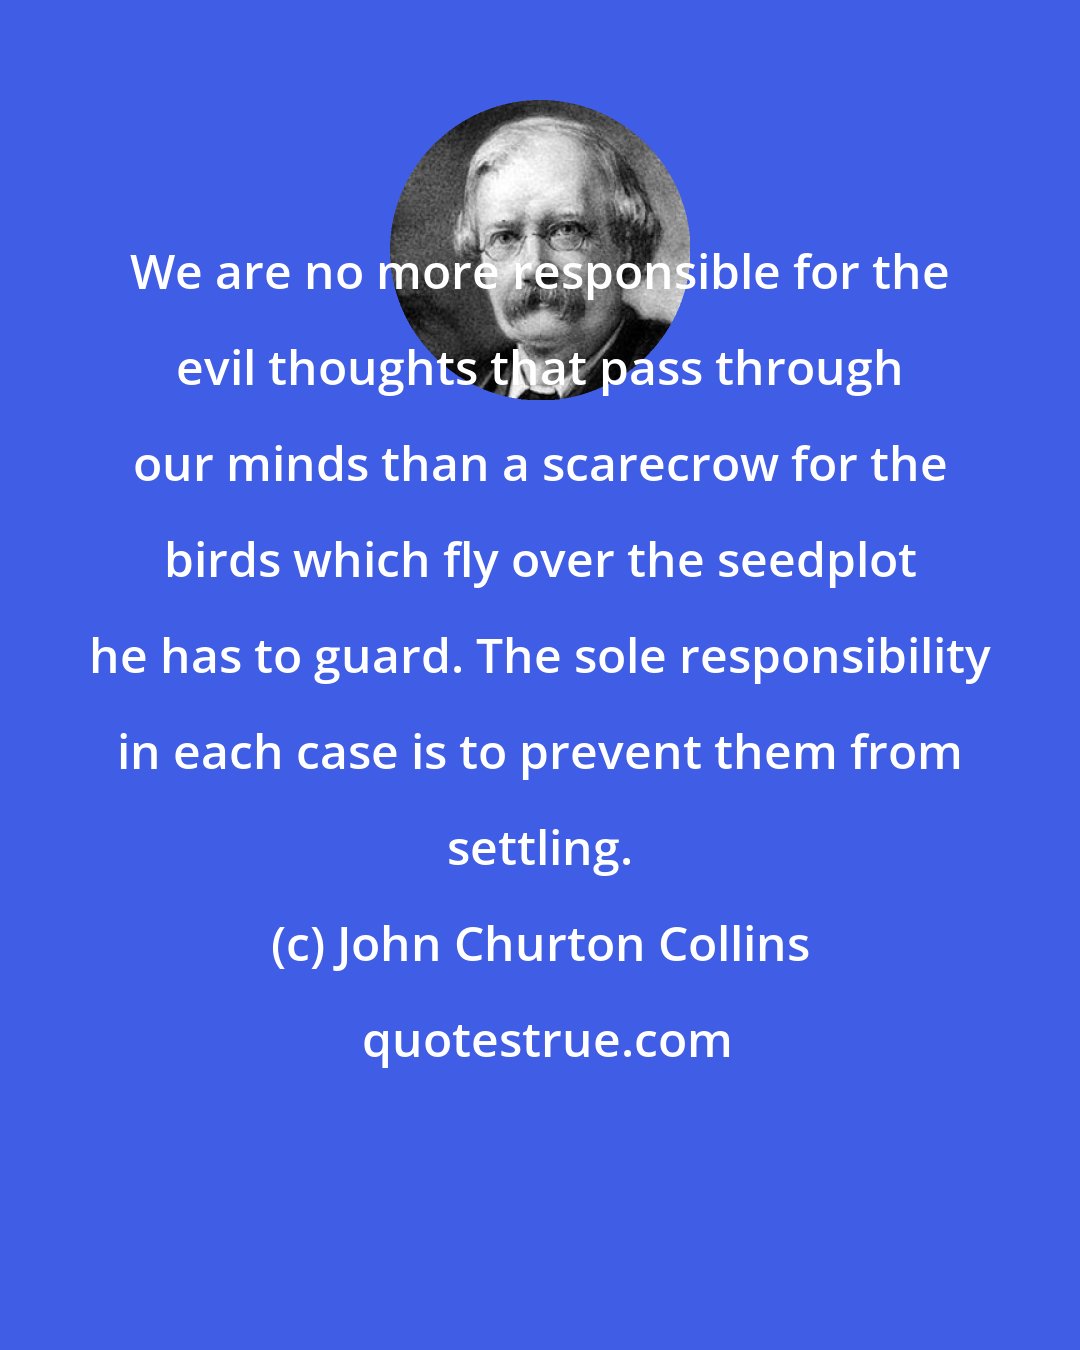 John Churton Collins: We are no more responsible for the evil thoughts that pass through our minds than a scarecrow for the birds which fly over the seedplot he has to guard. The sole responsibility in each case is to prevent them from settling.